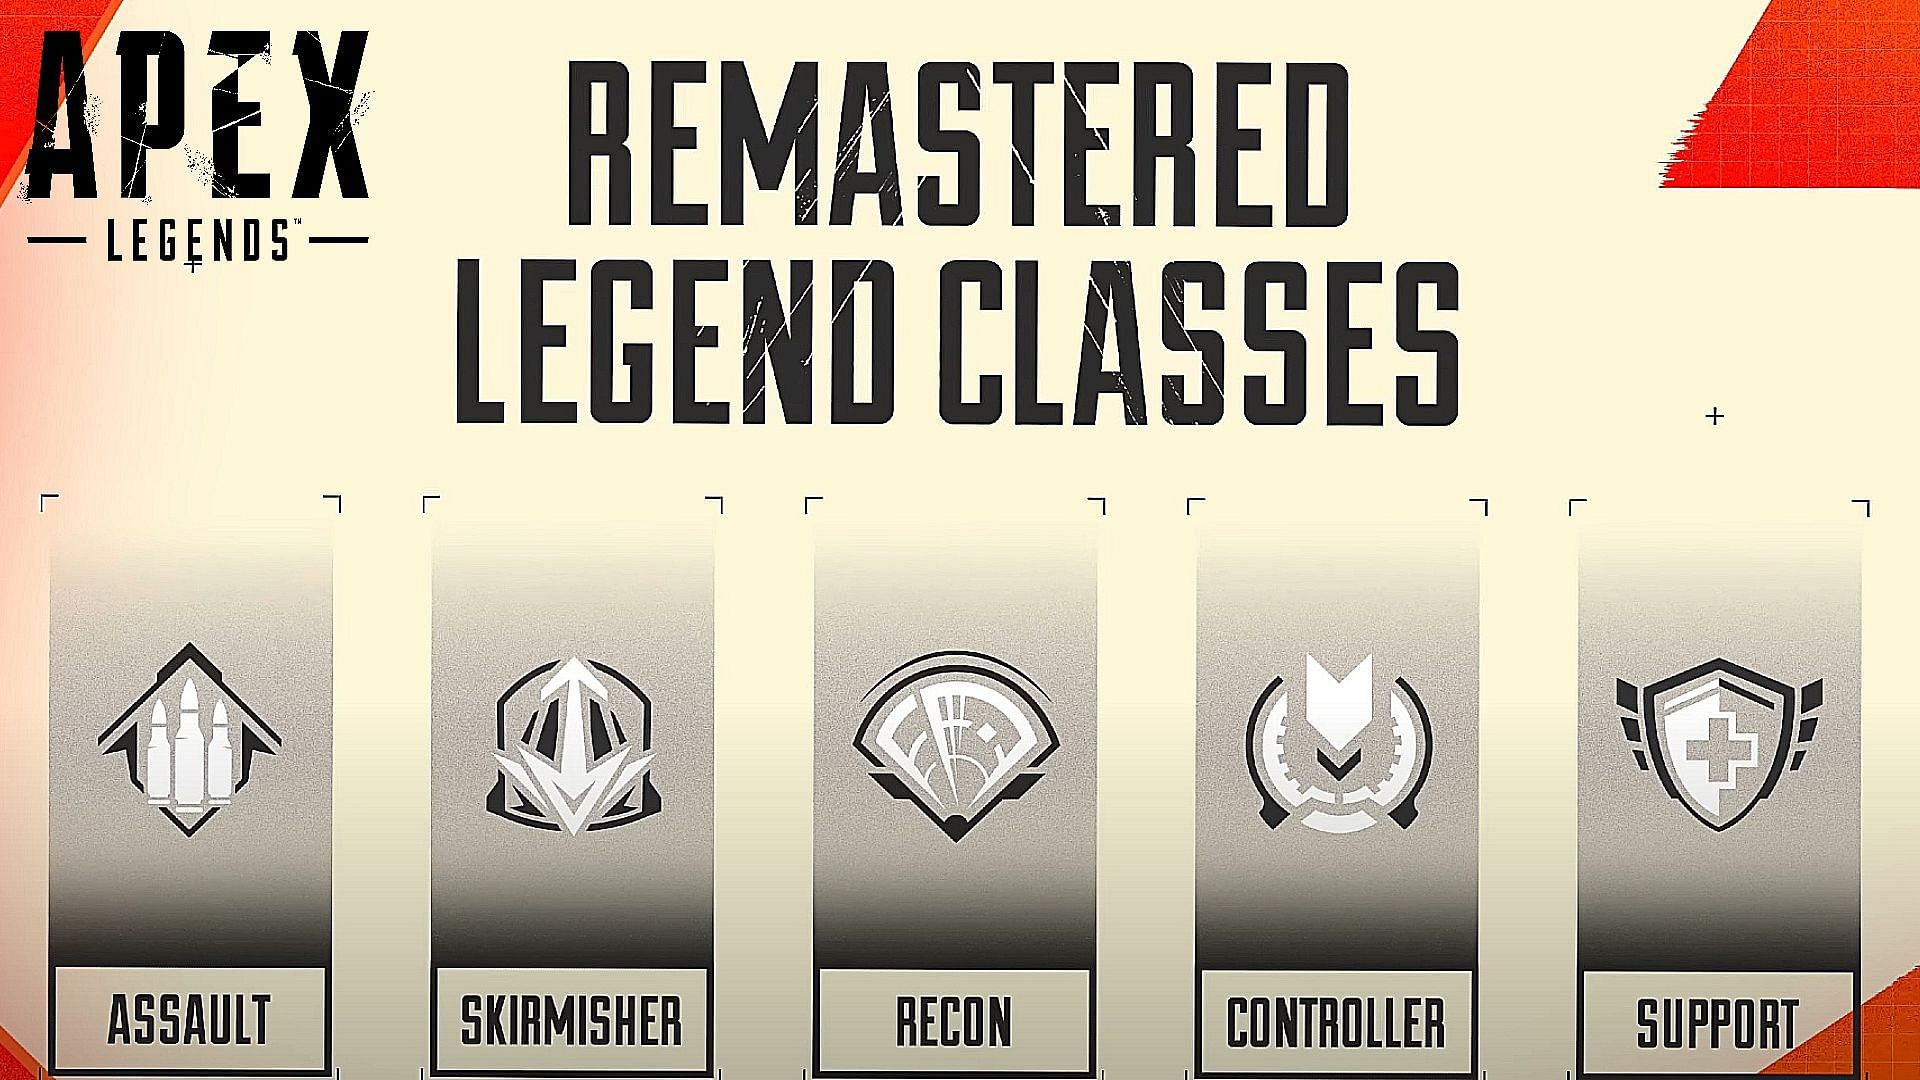 A look at the remastered legend classes in Apex Legends (Image via EA)